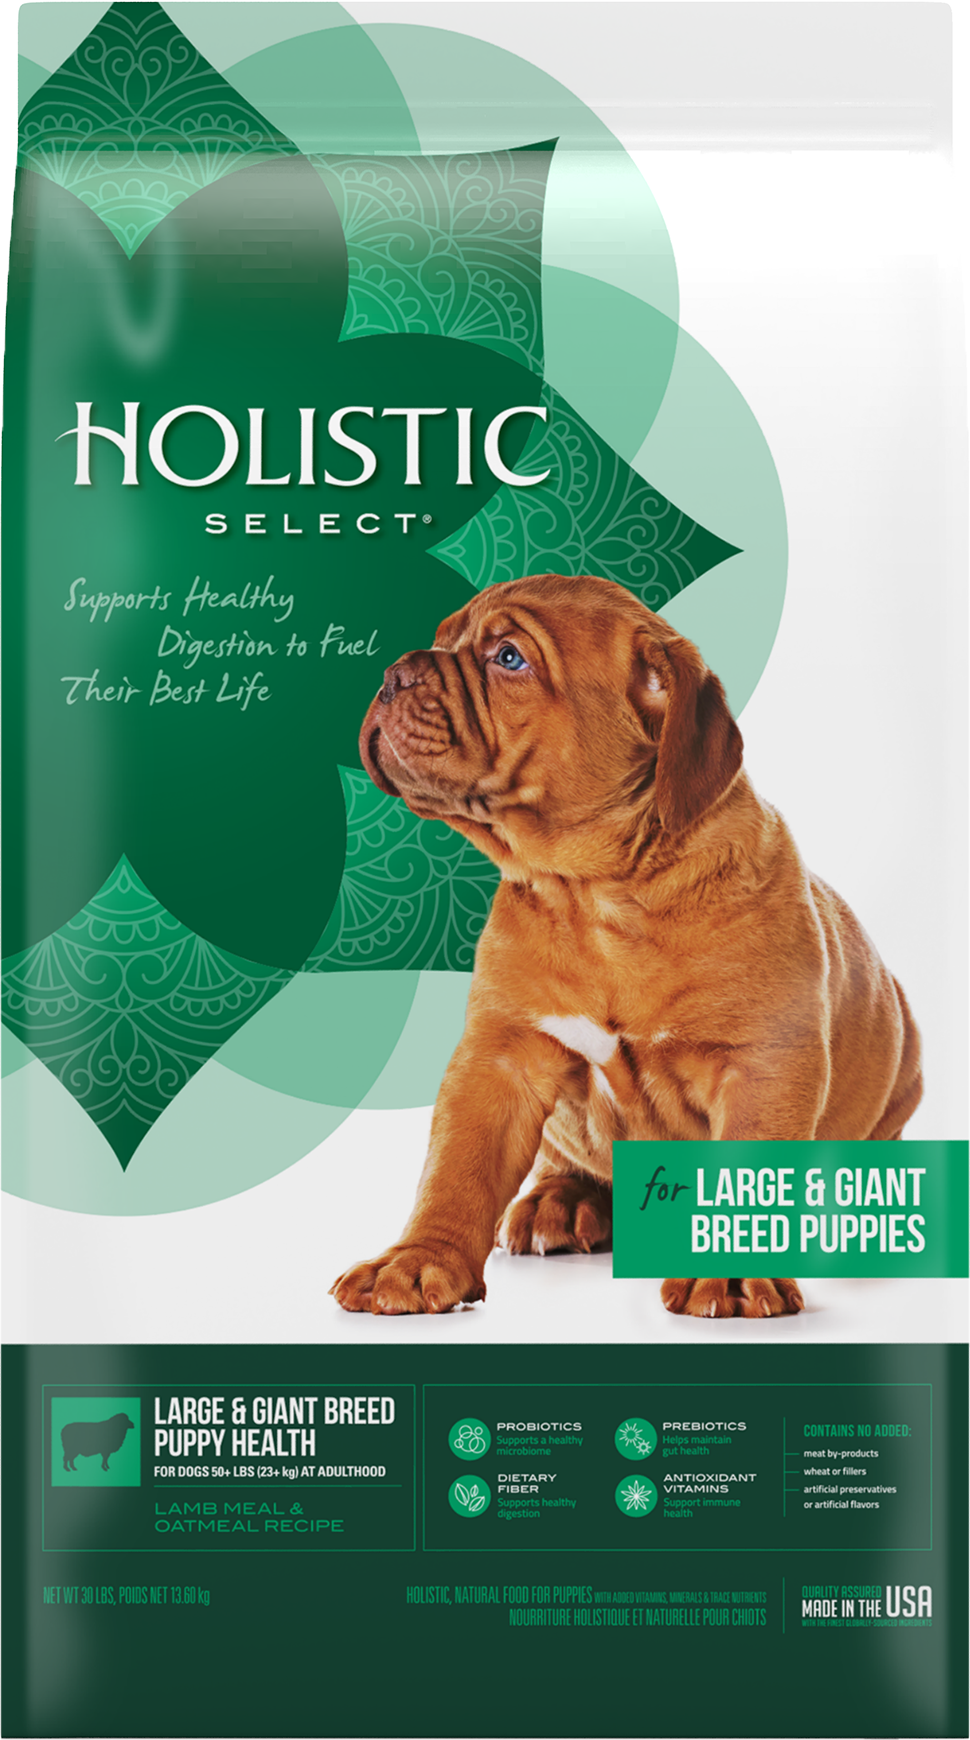 Large & Giant Breed Puppy Health product packaging image 1